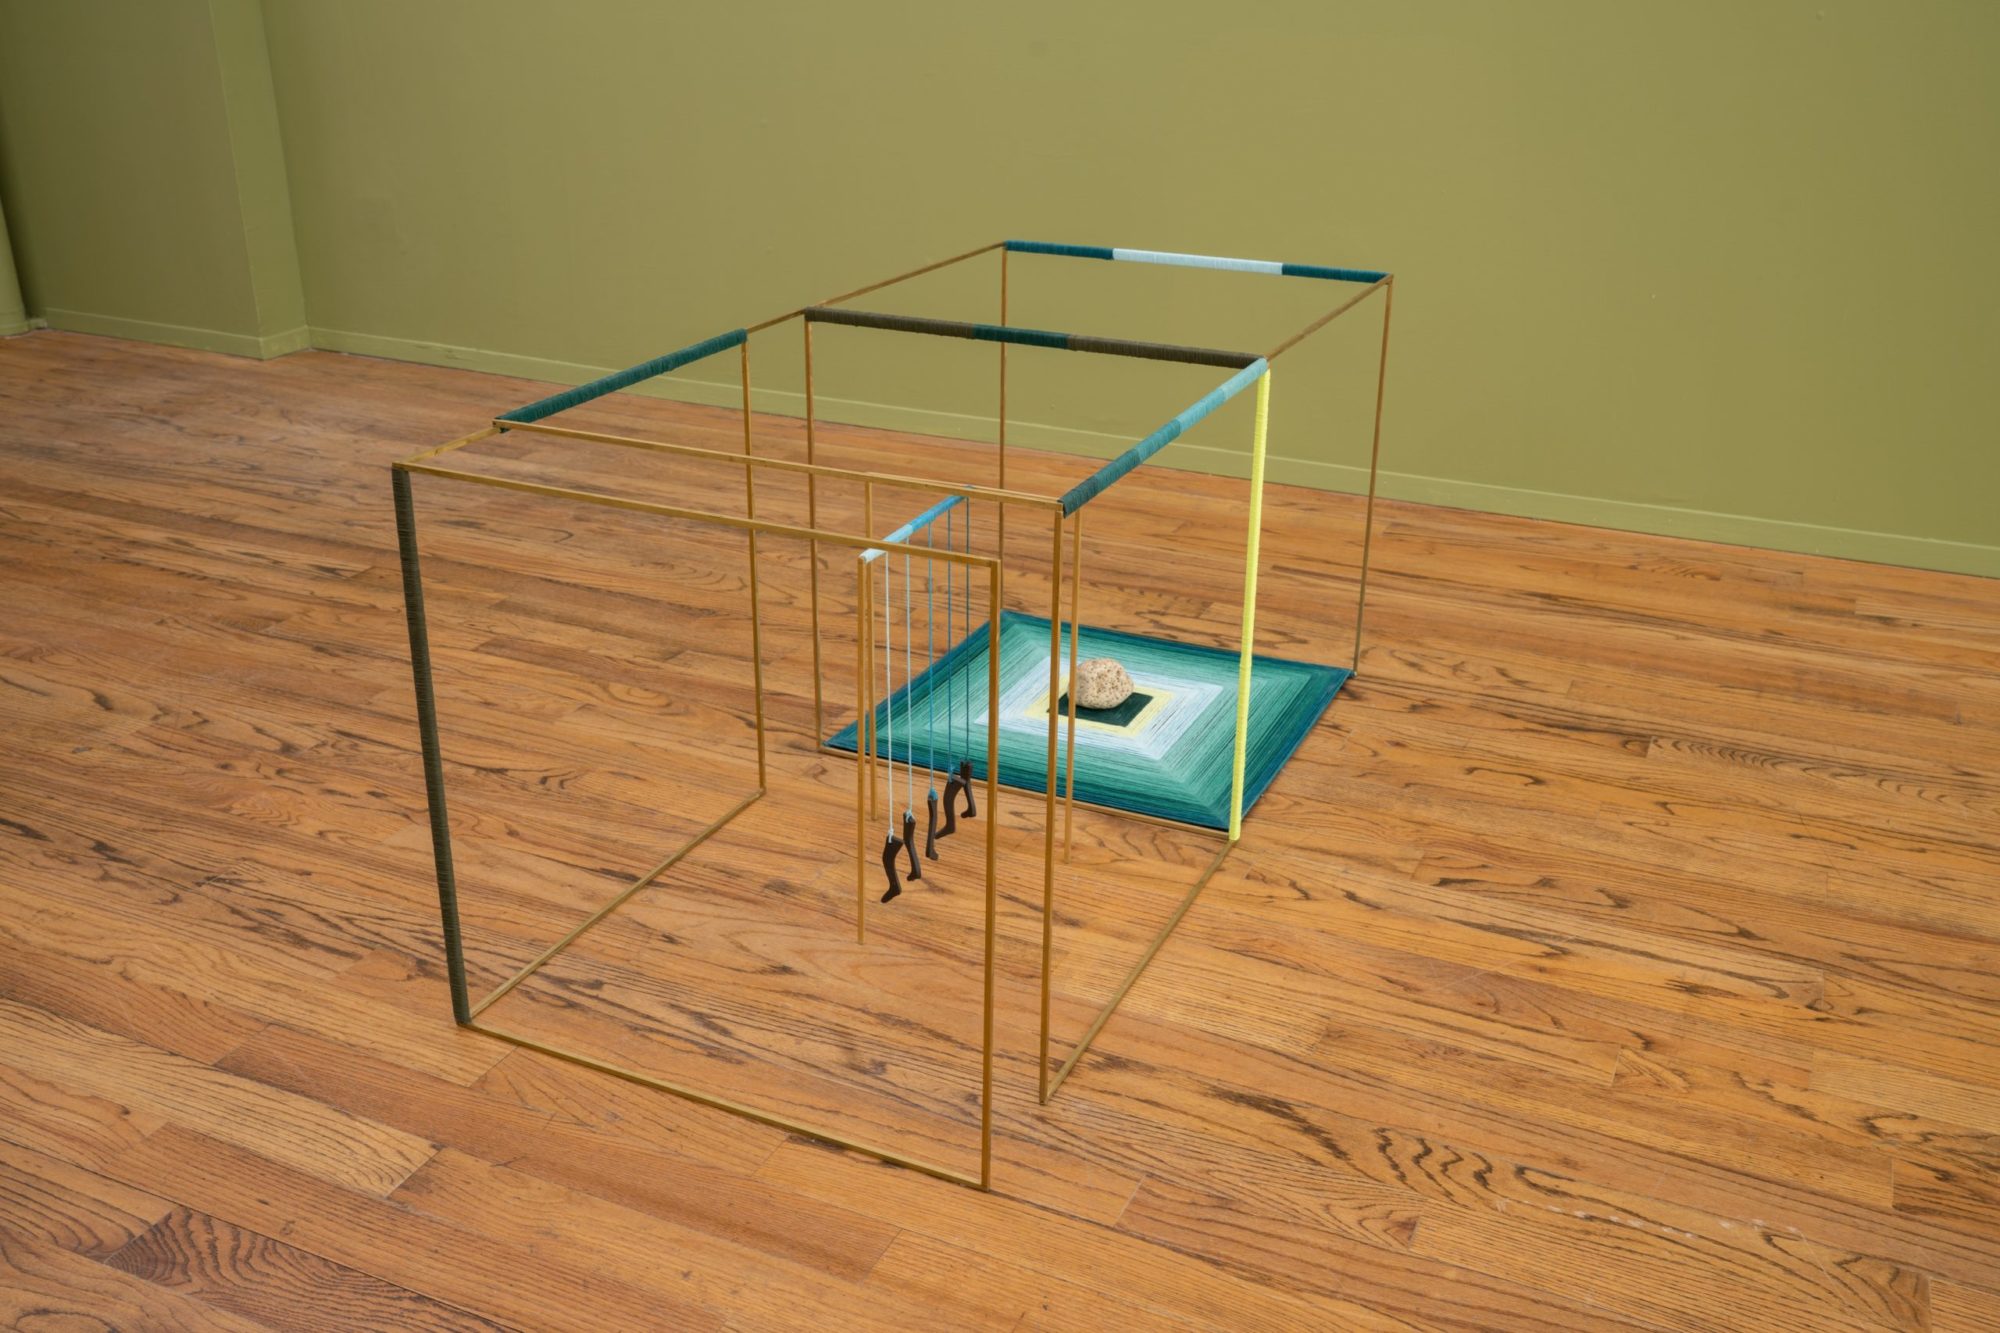 Single row of brass squares connected by blue and green threads creating two cubes. In the cube shape closest to the camera appears a row of river stones hanging by some blue threads. In the adjacent cube is a piece of rock sitting in the center of the cube's base. The base has squared layers of different threads colored blue, green, and yellow.